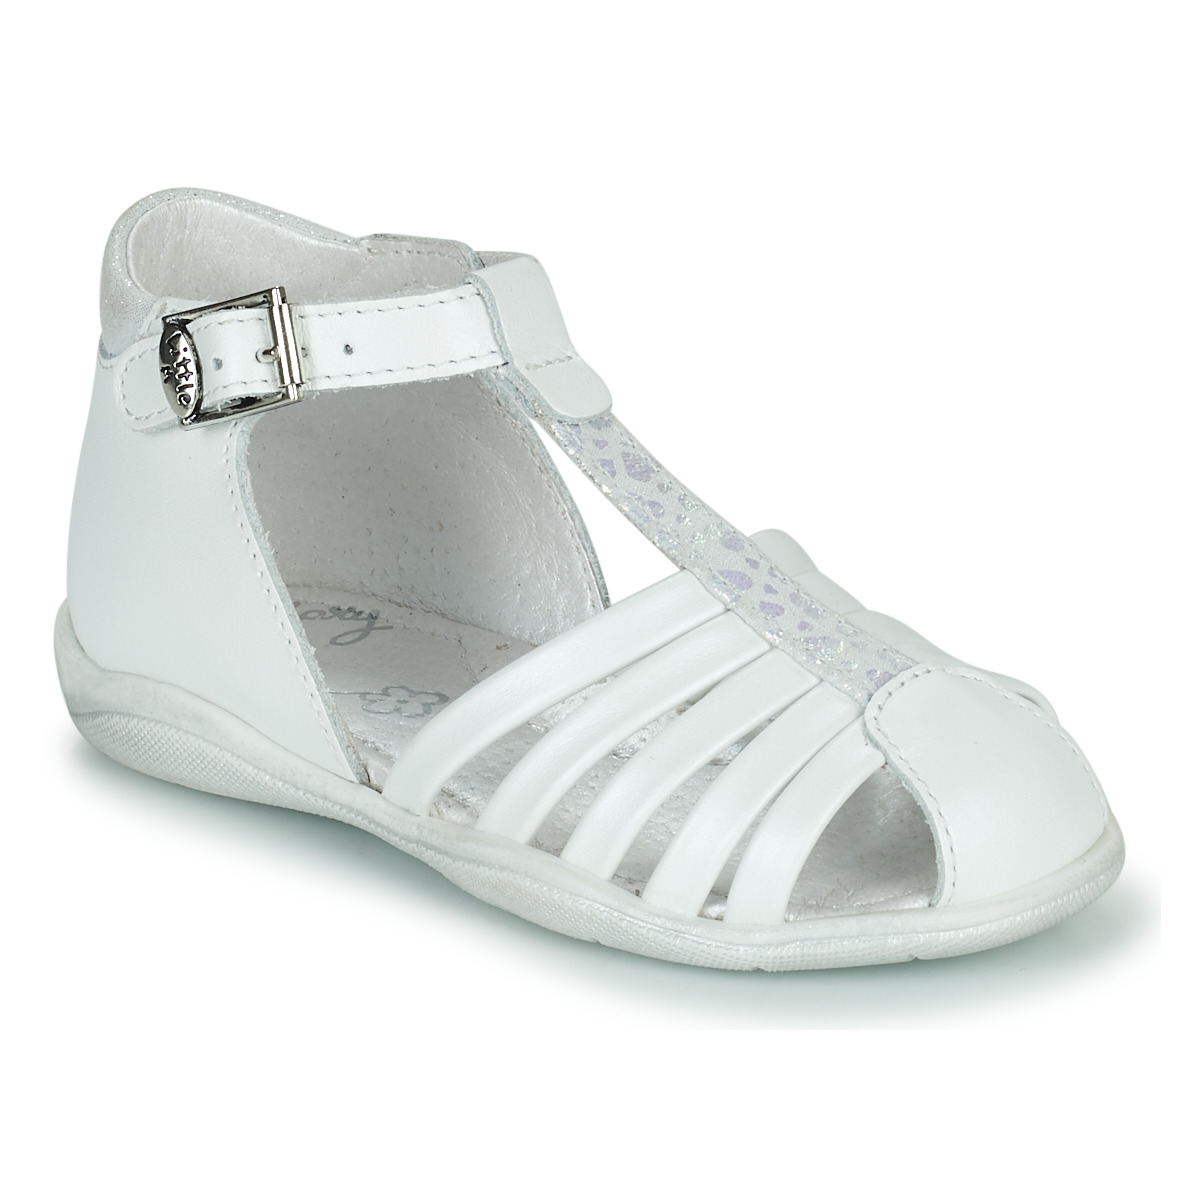 Chaussures Fille Hoka one one Little Mary VOLGA Blanc